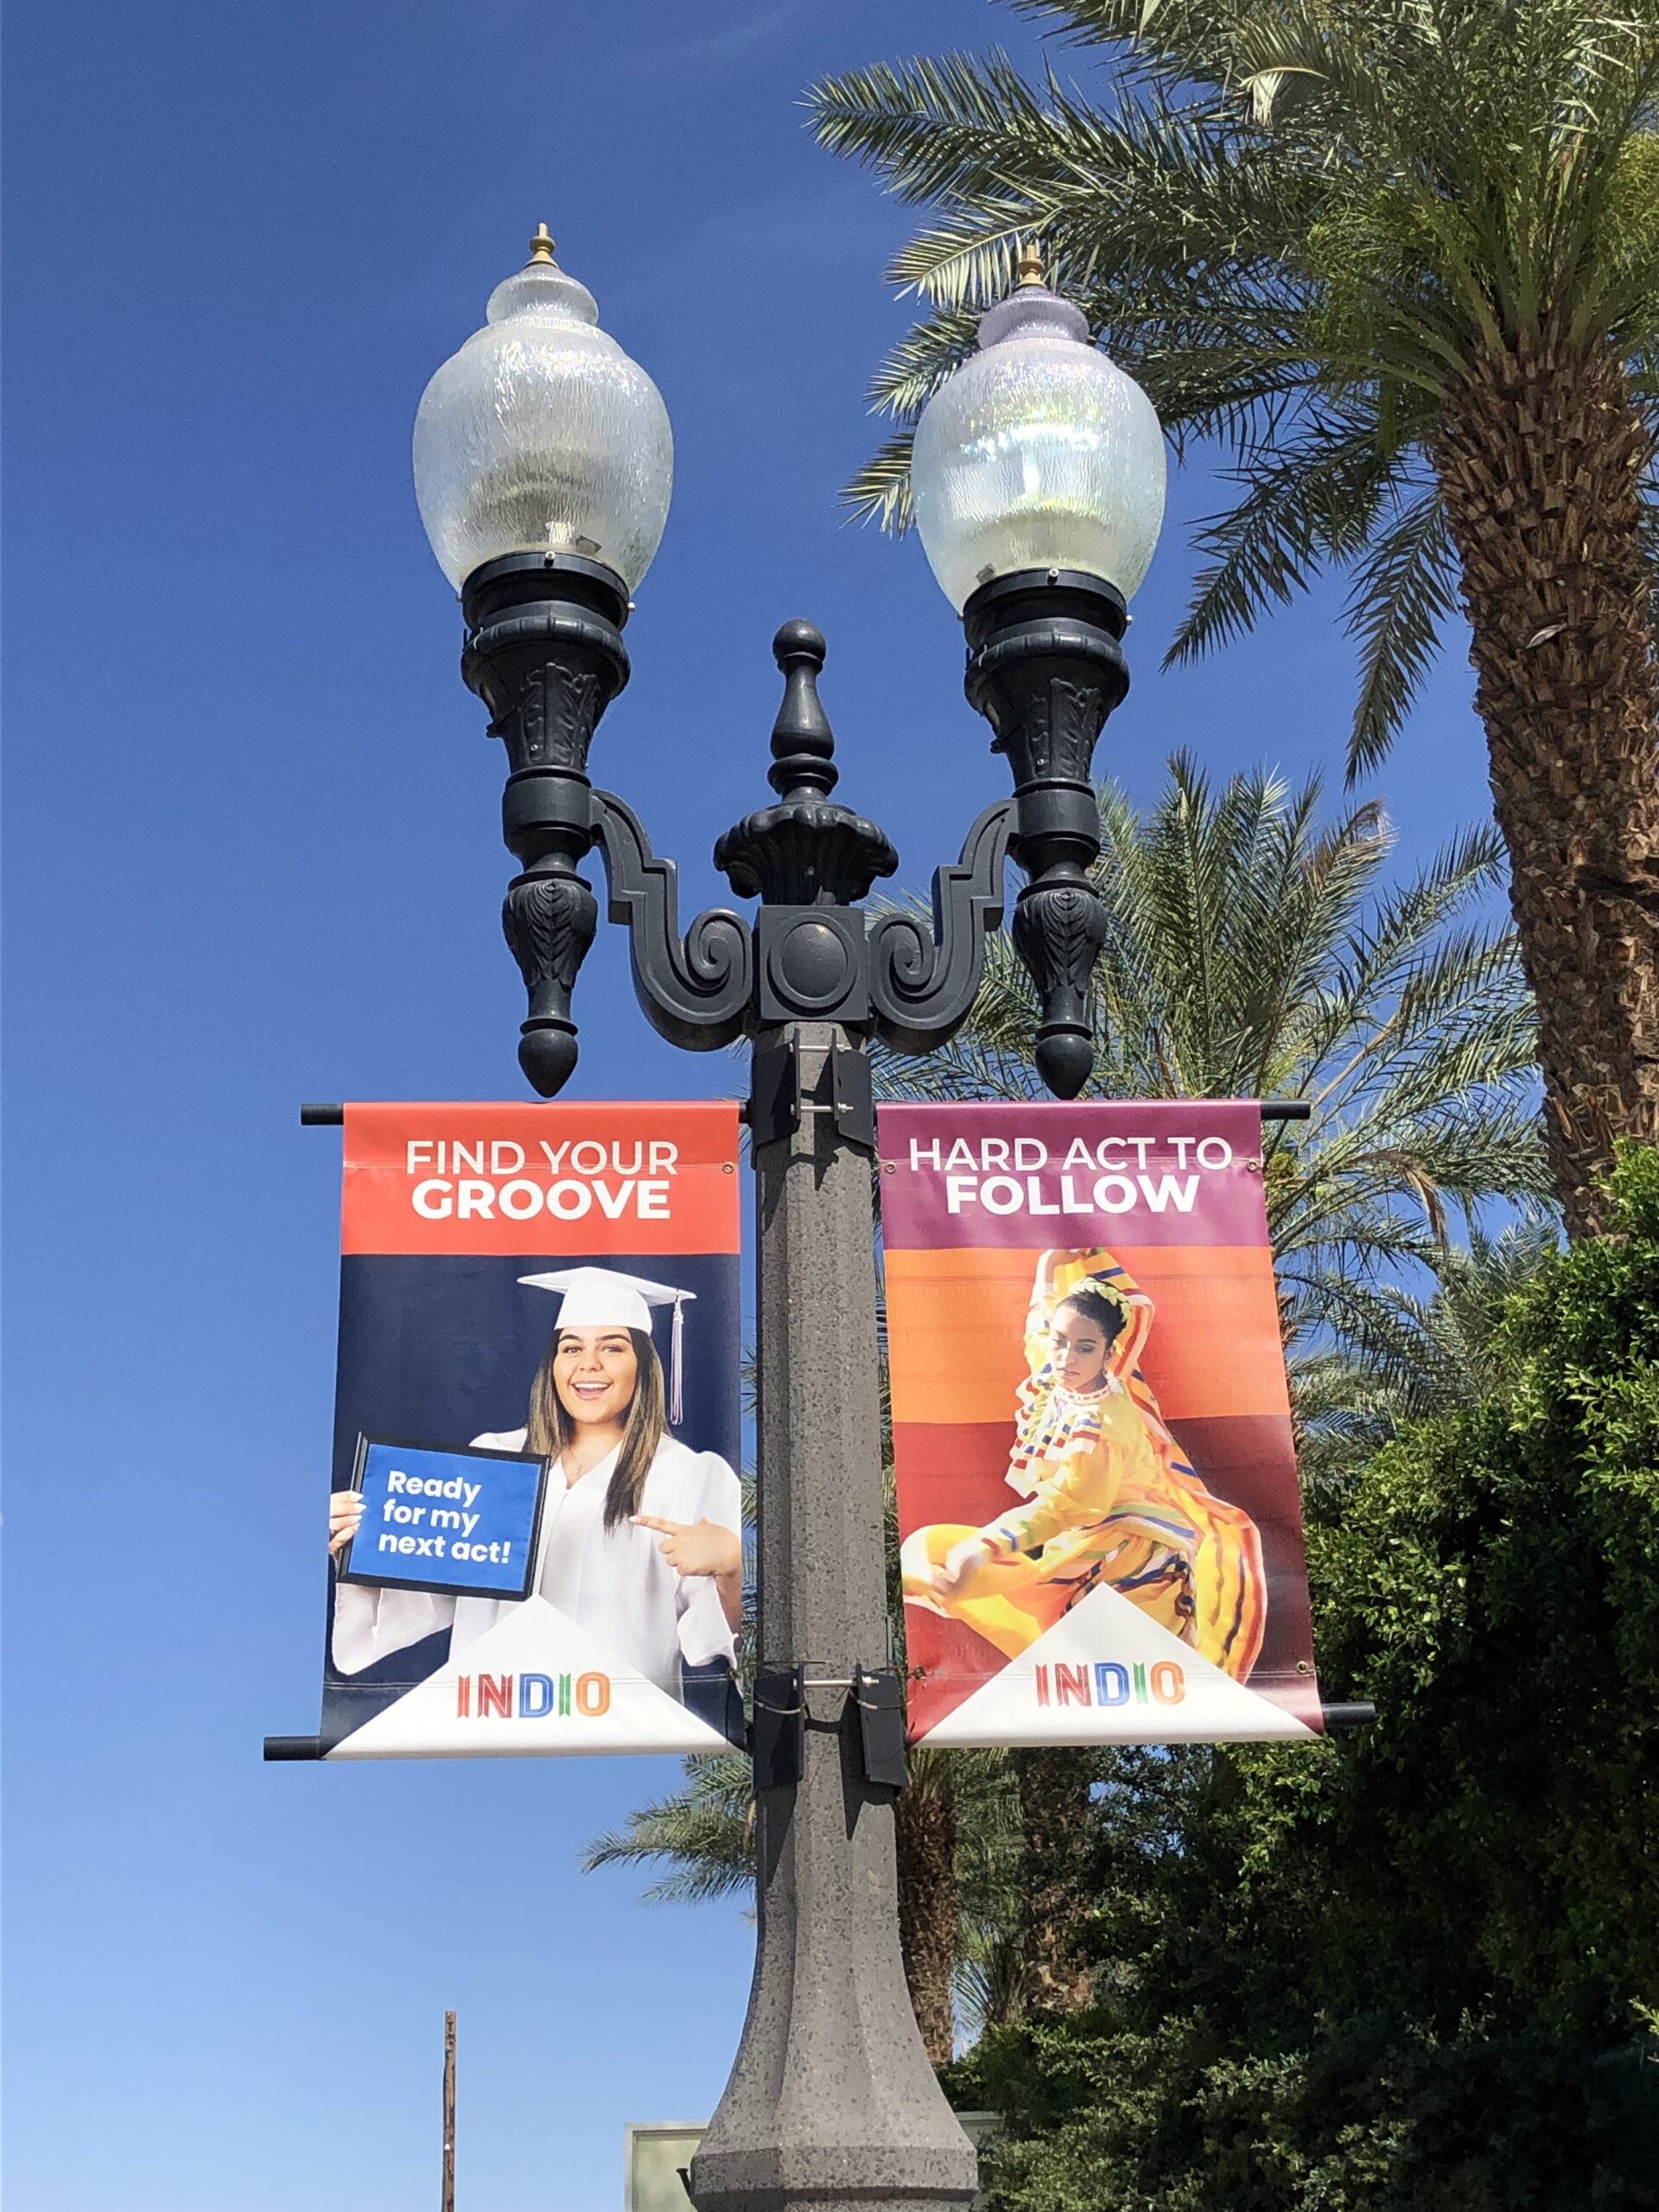 Pole banners in Indio, CA that feature a graduate and the text "Find Your Groove" and another featuring a dancer with the text "Hard Act To Follow".